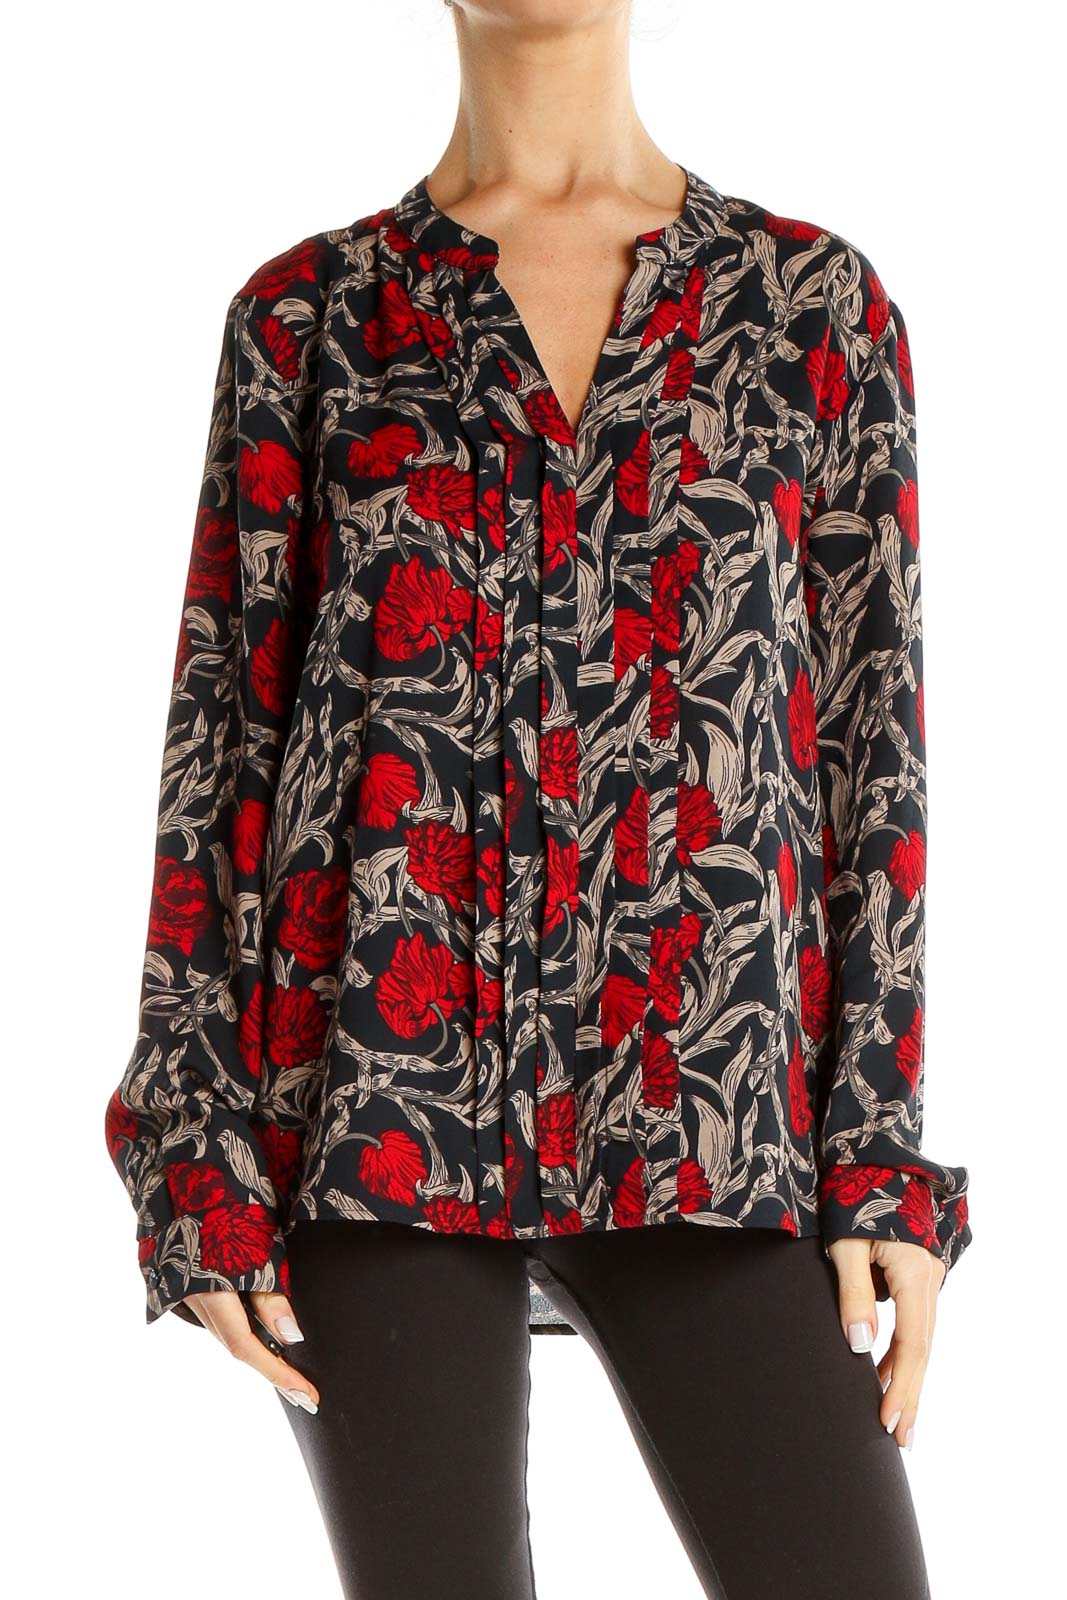 Black and Red Floral Print Classic Blouse Front